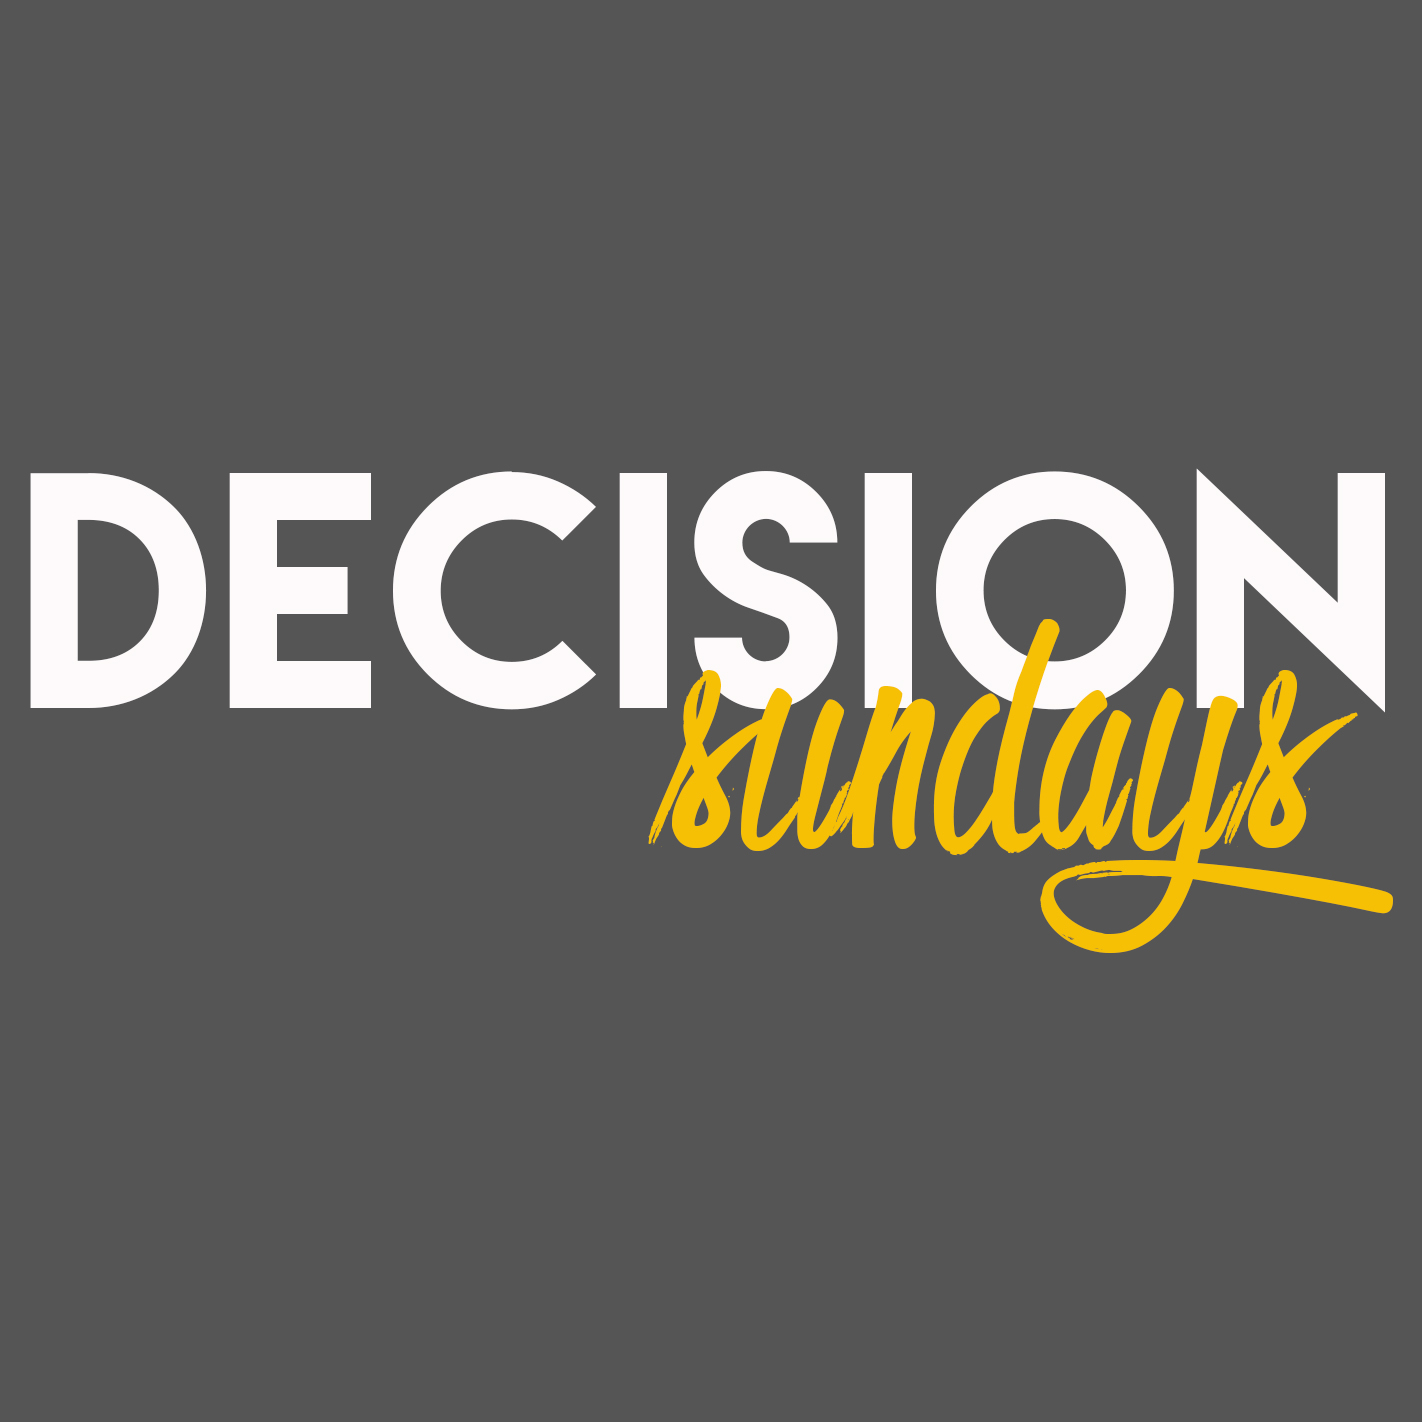 VISION FOR THE DECISIONS